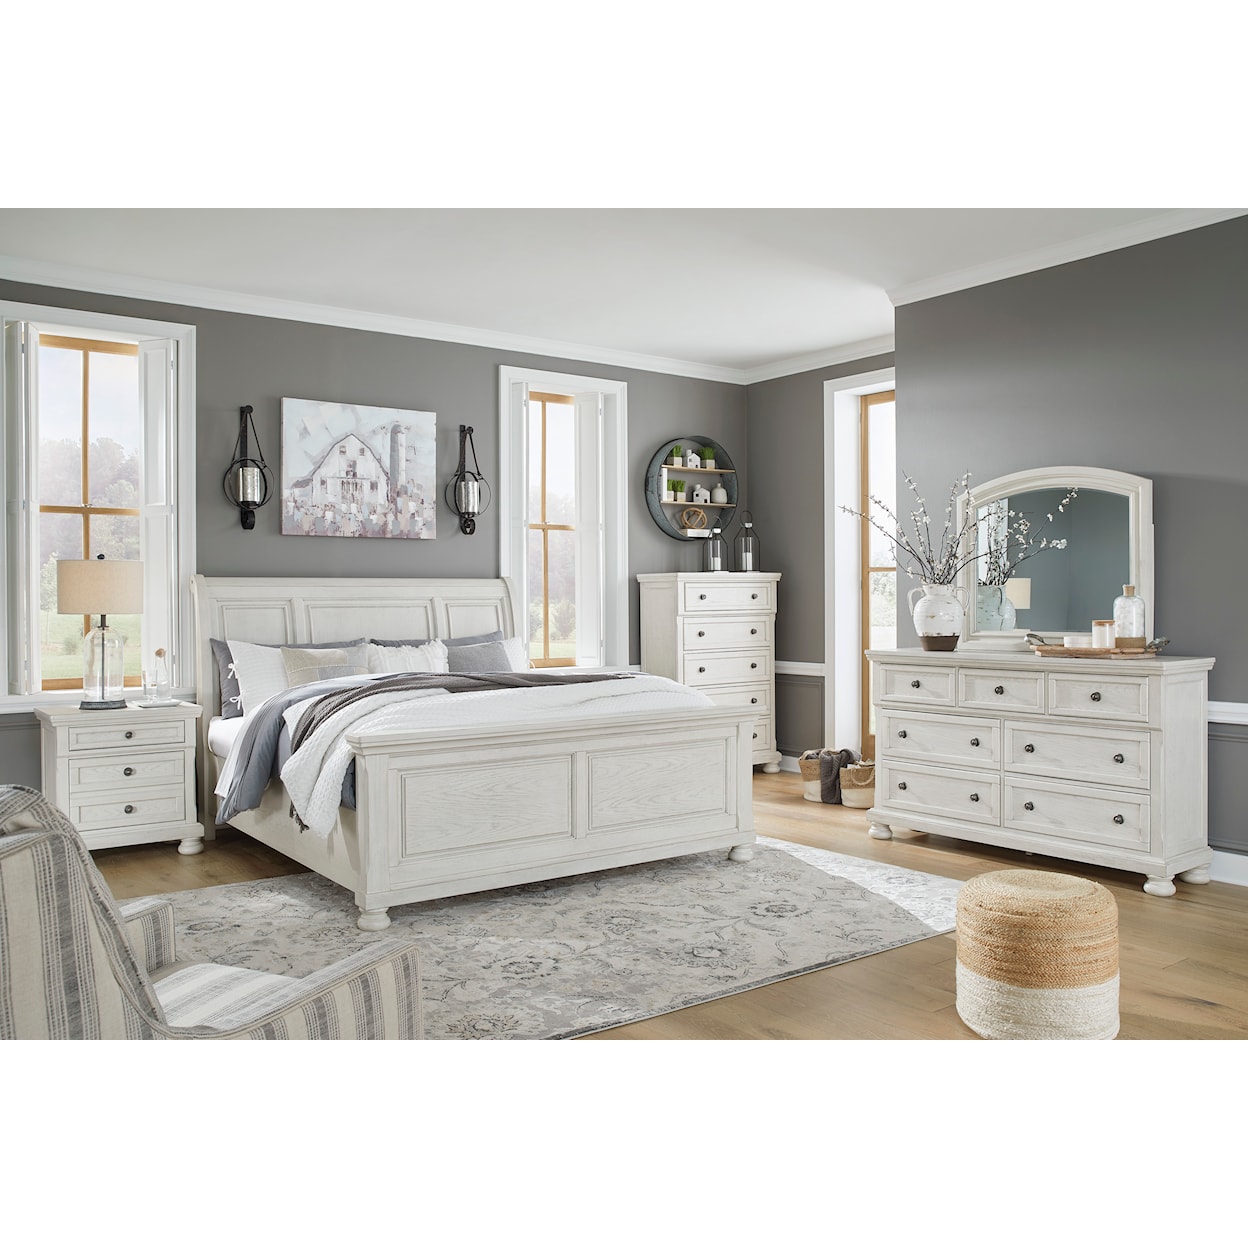 Benchcraft Robbinsdale King Sleigh Bed